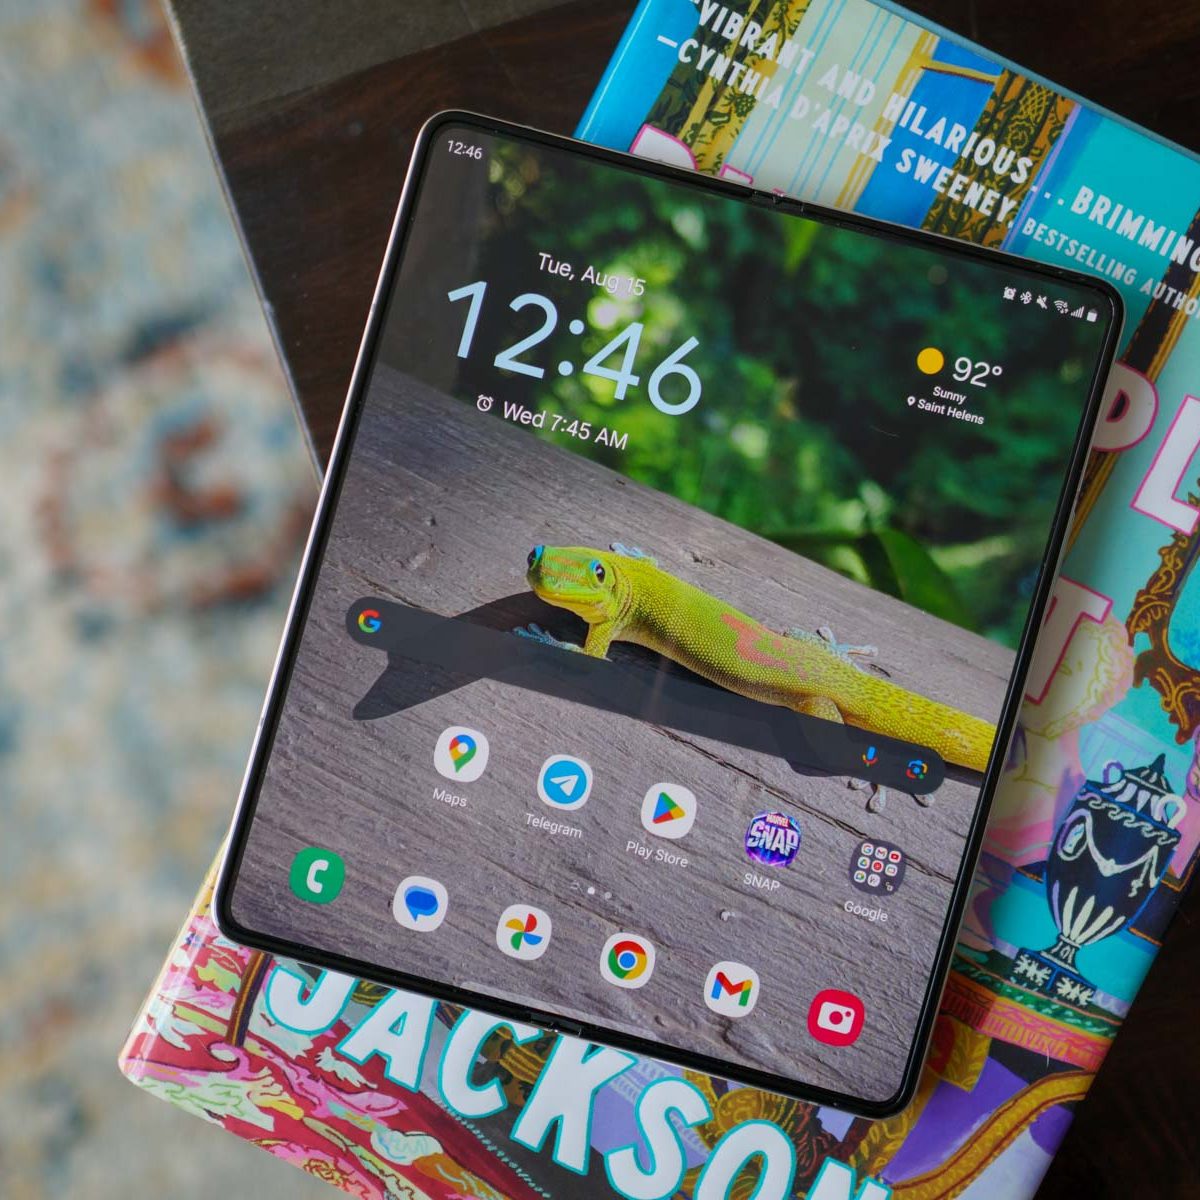 The Galaxy Z Fold 5's biggest upgrade is hiding in plain sight